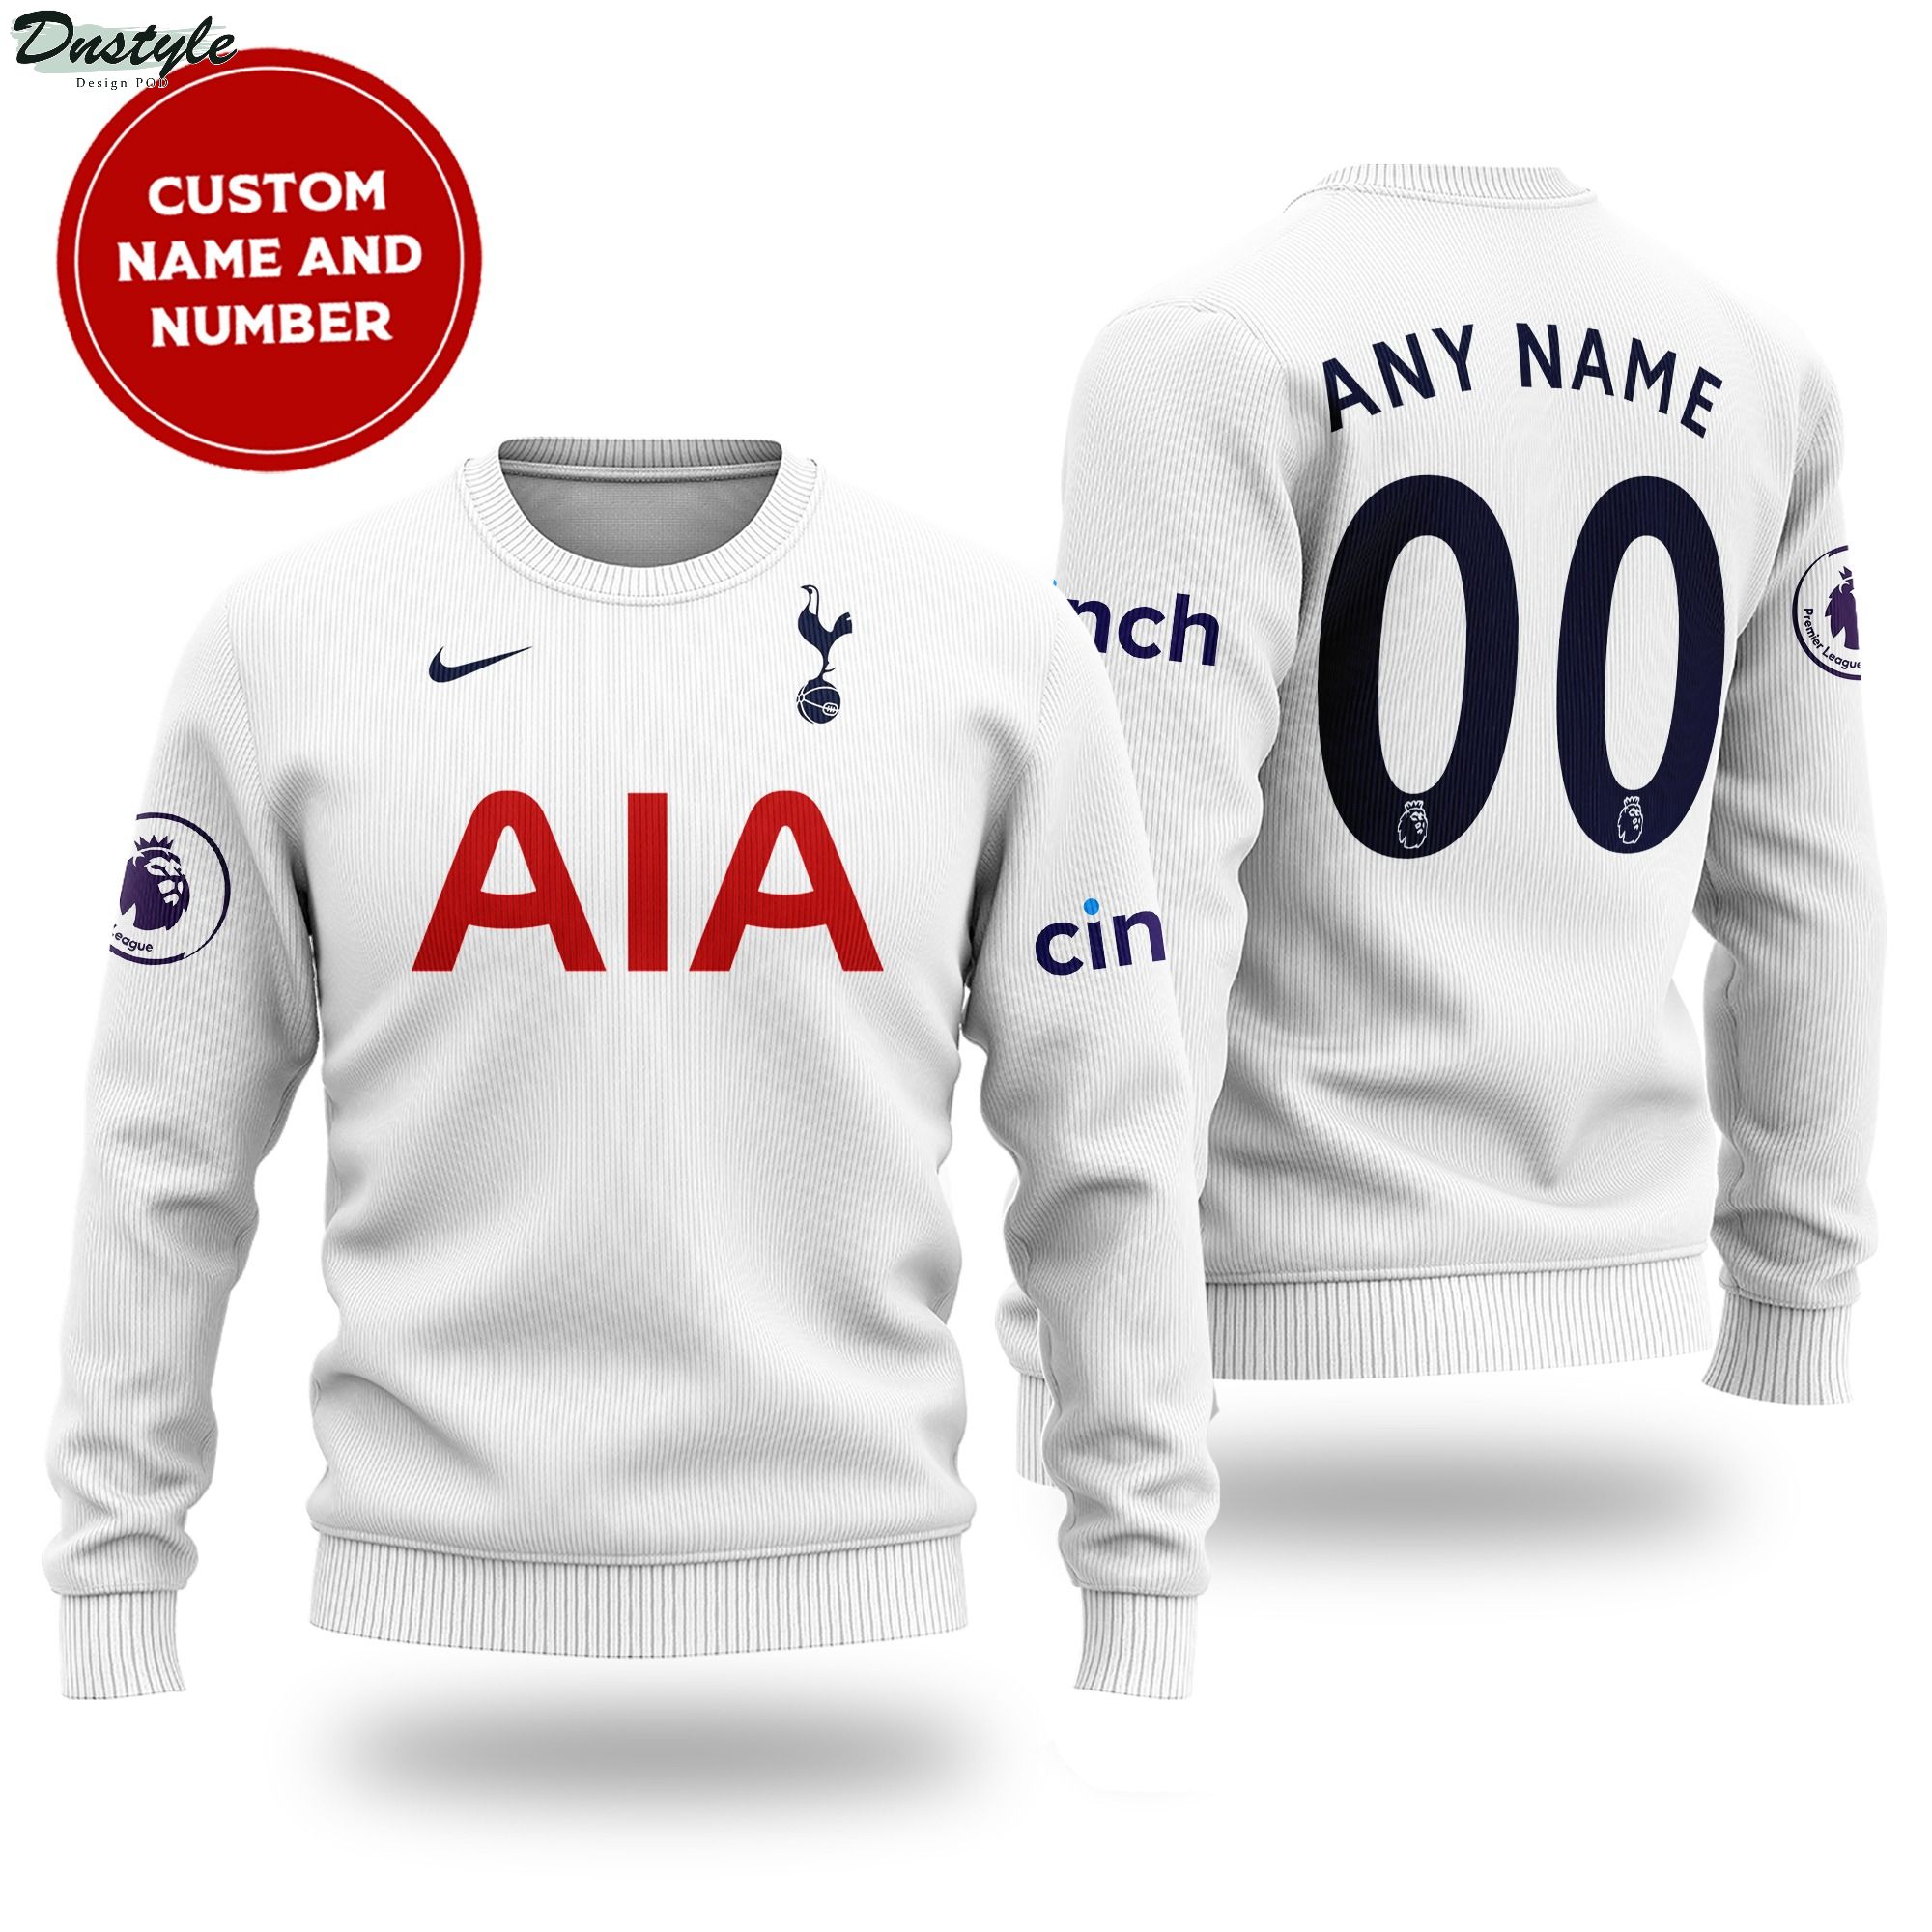 Tottenham Hotspur custom name and number ugly sweater